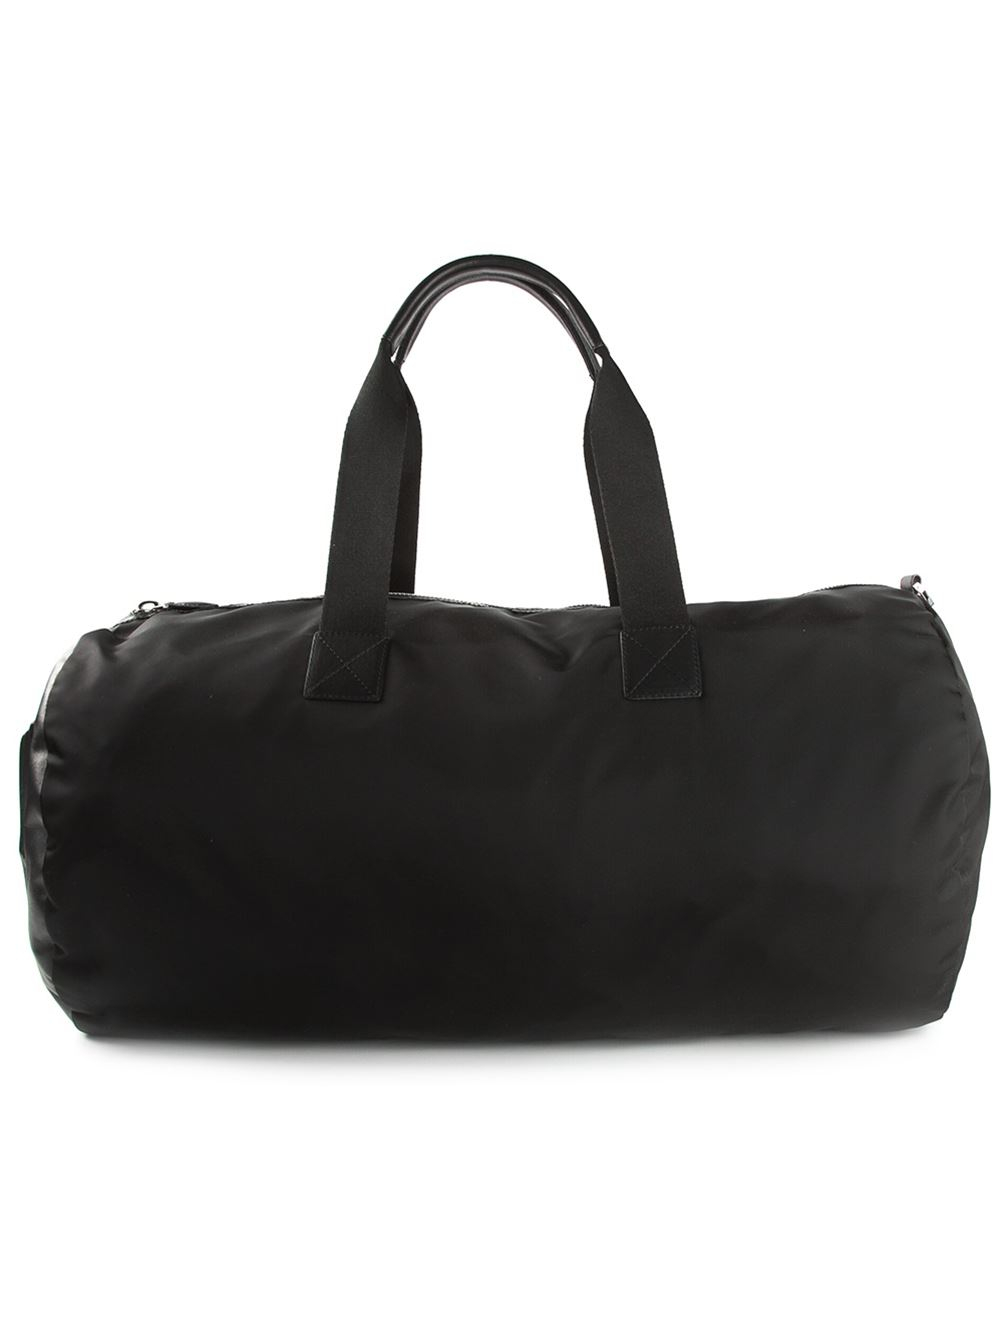 Lyst - Givenchy Large Duffle Bag in Black for Men